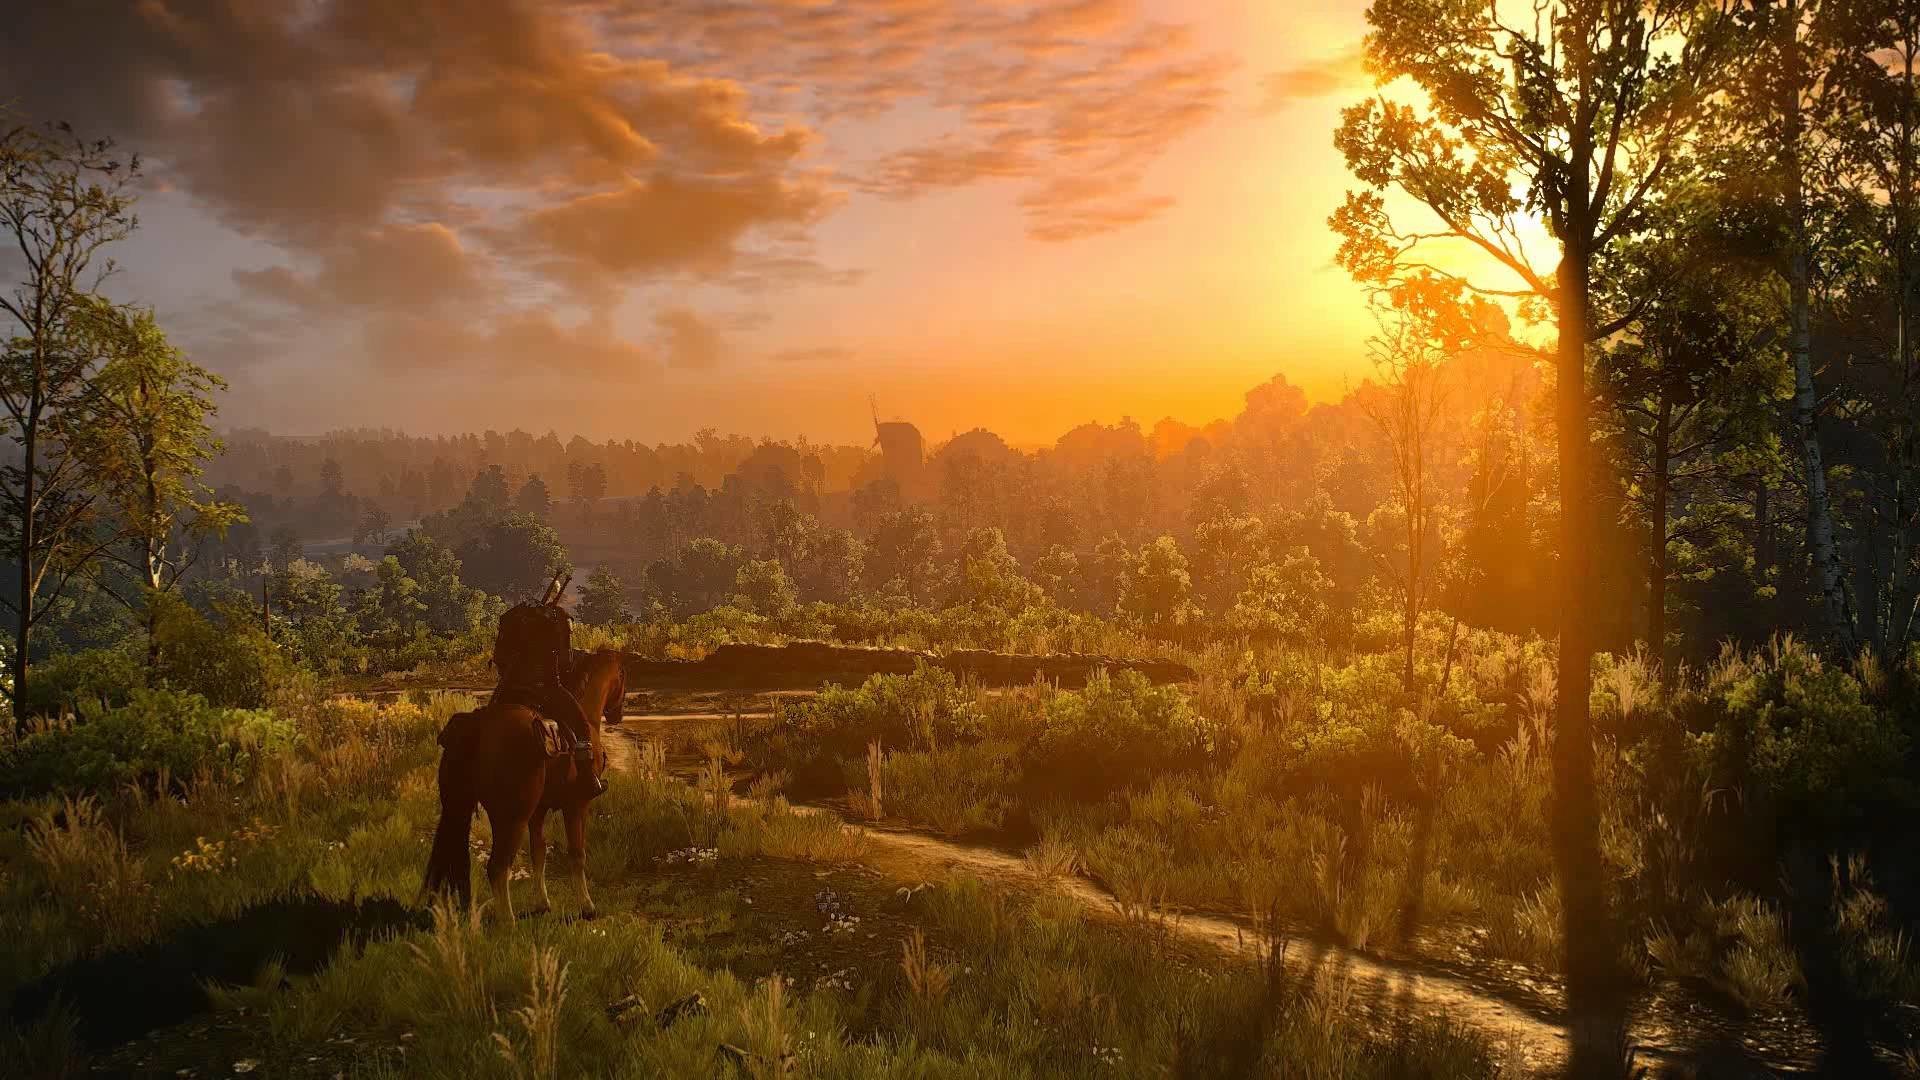 witcher 3 animated wallpaper,nature,natural landscape,sky,sunlight,morning